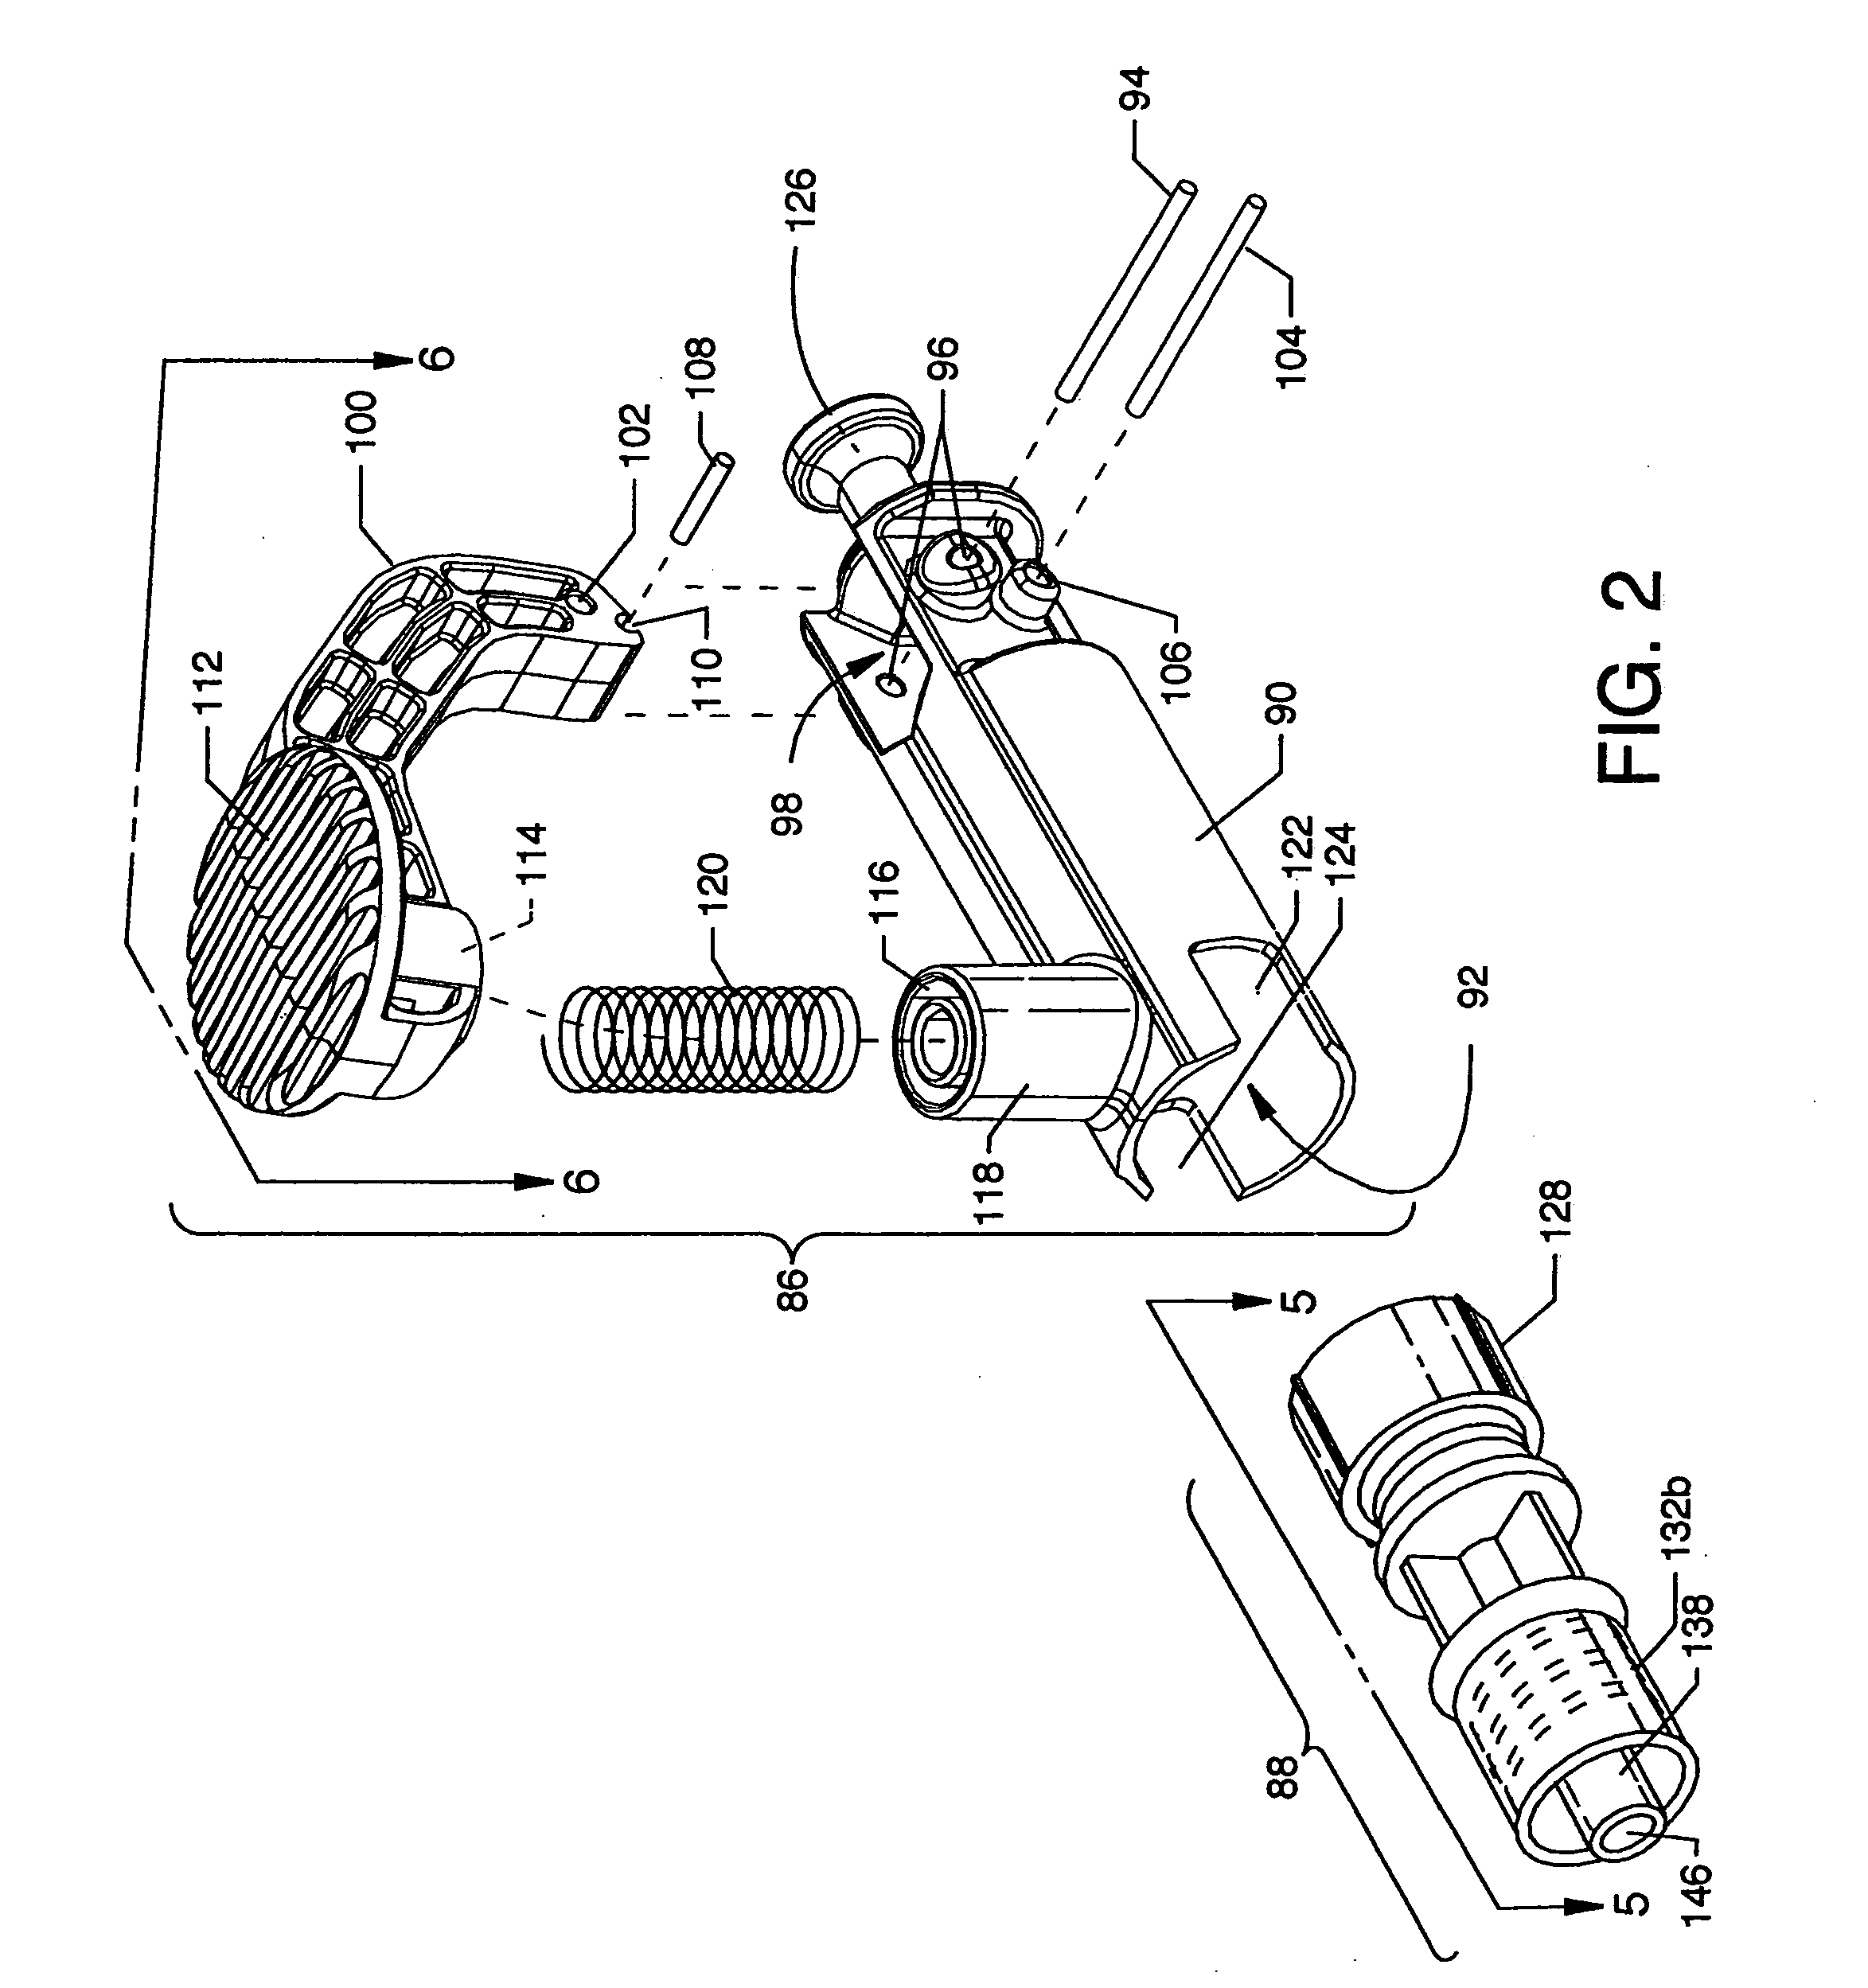 Gas inflation/evacuation system incorporating a reservoir and removably attached sealing system for a guidewire assembly having an occlusive device